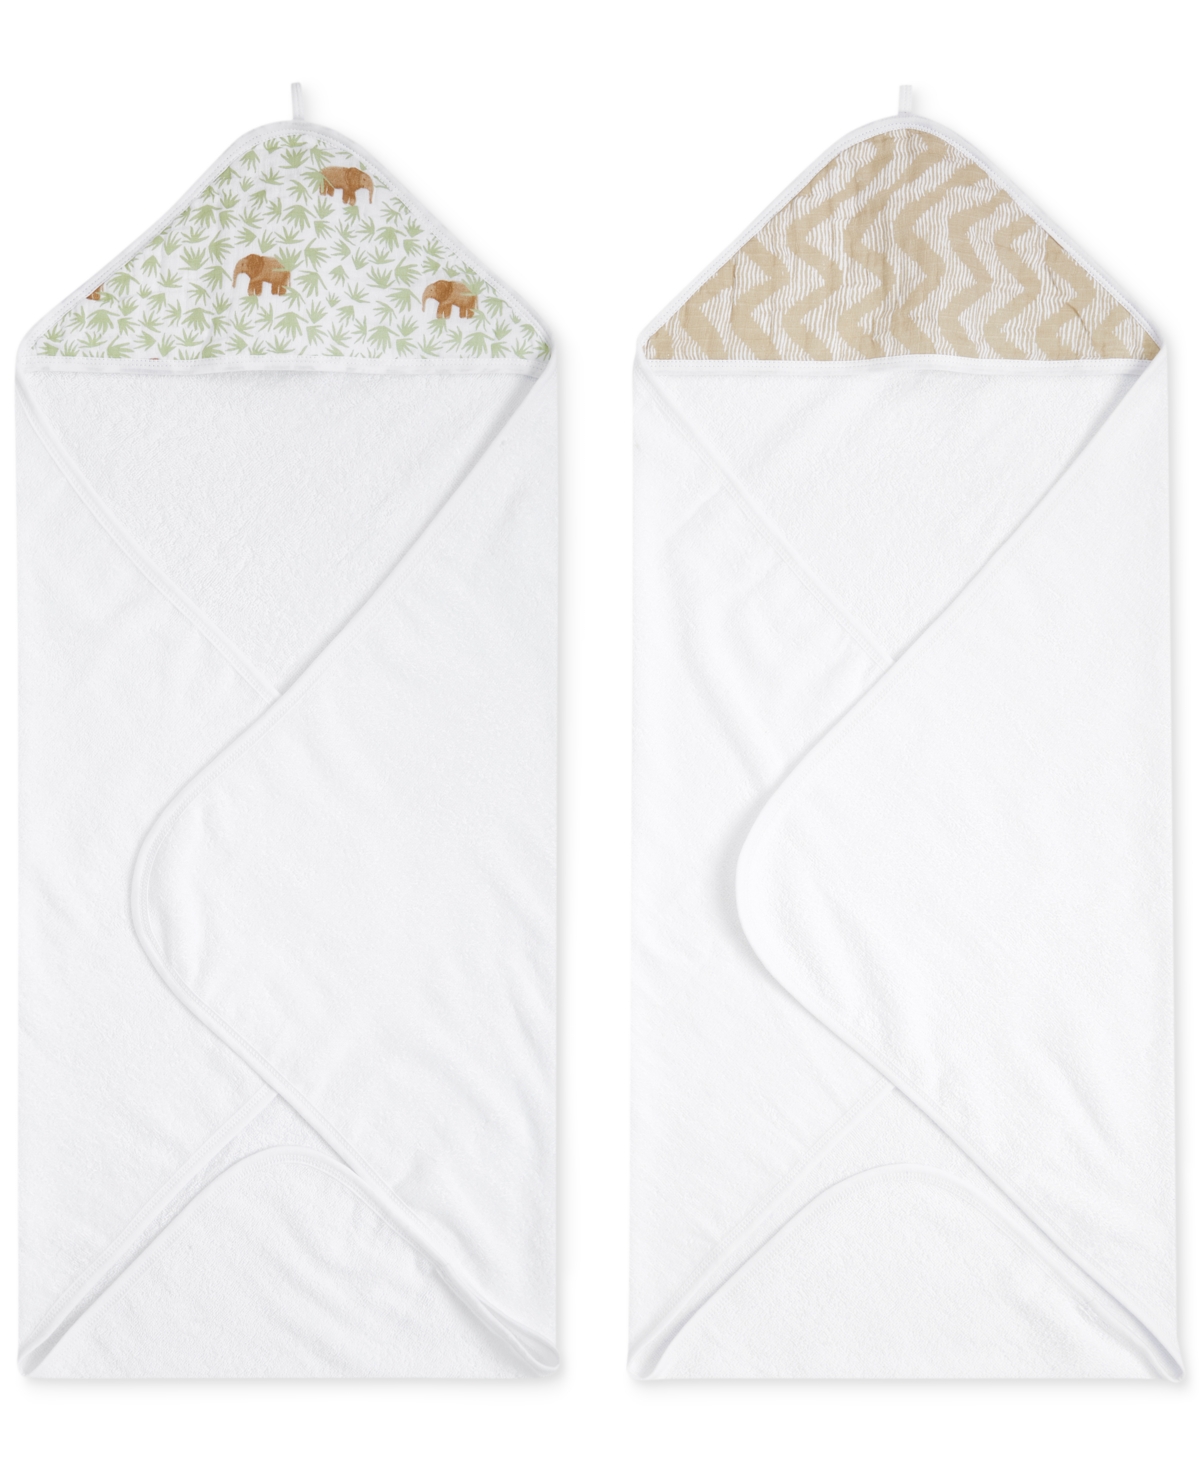 Aden By Aden + Anais Baby Boys Or Baby Girls Hooded Towels, Pack Of 2 In Tan